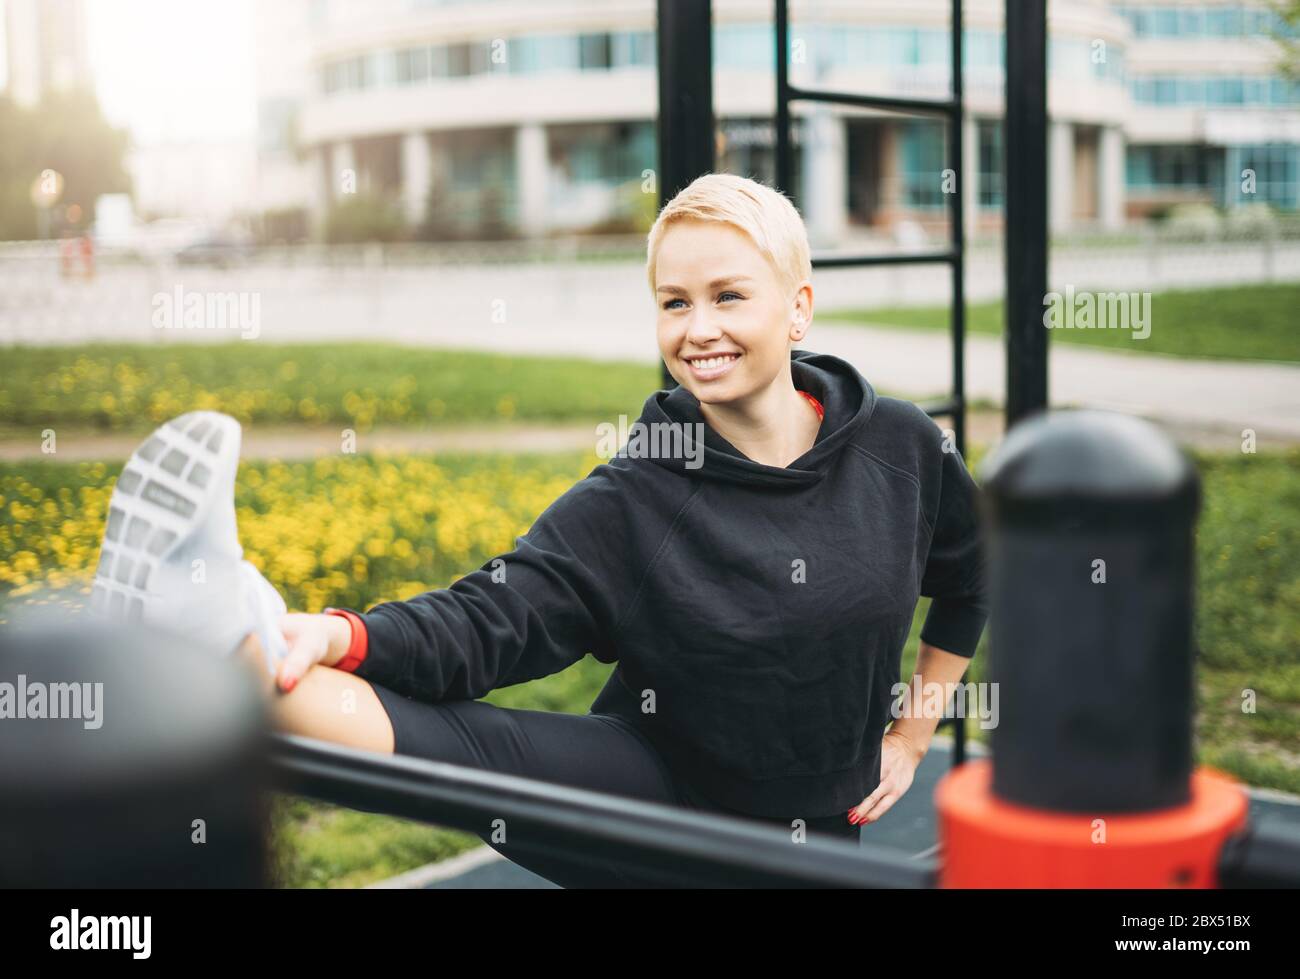 Attractive fit young woman in sport wear stretching on street workout area. Healthy lifestyle in city Stock Photo